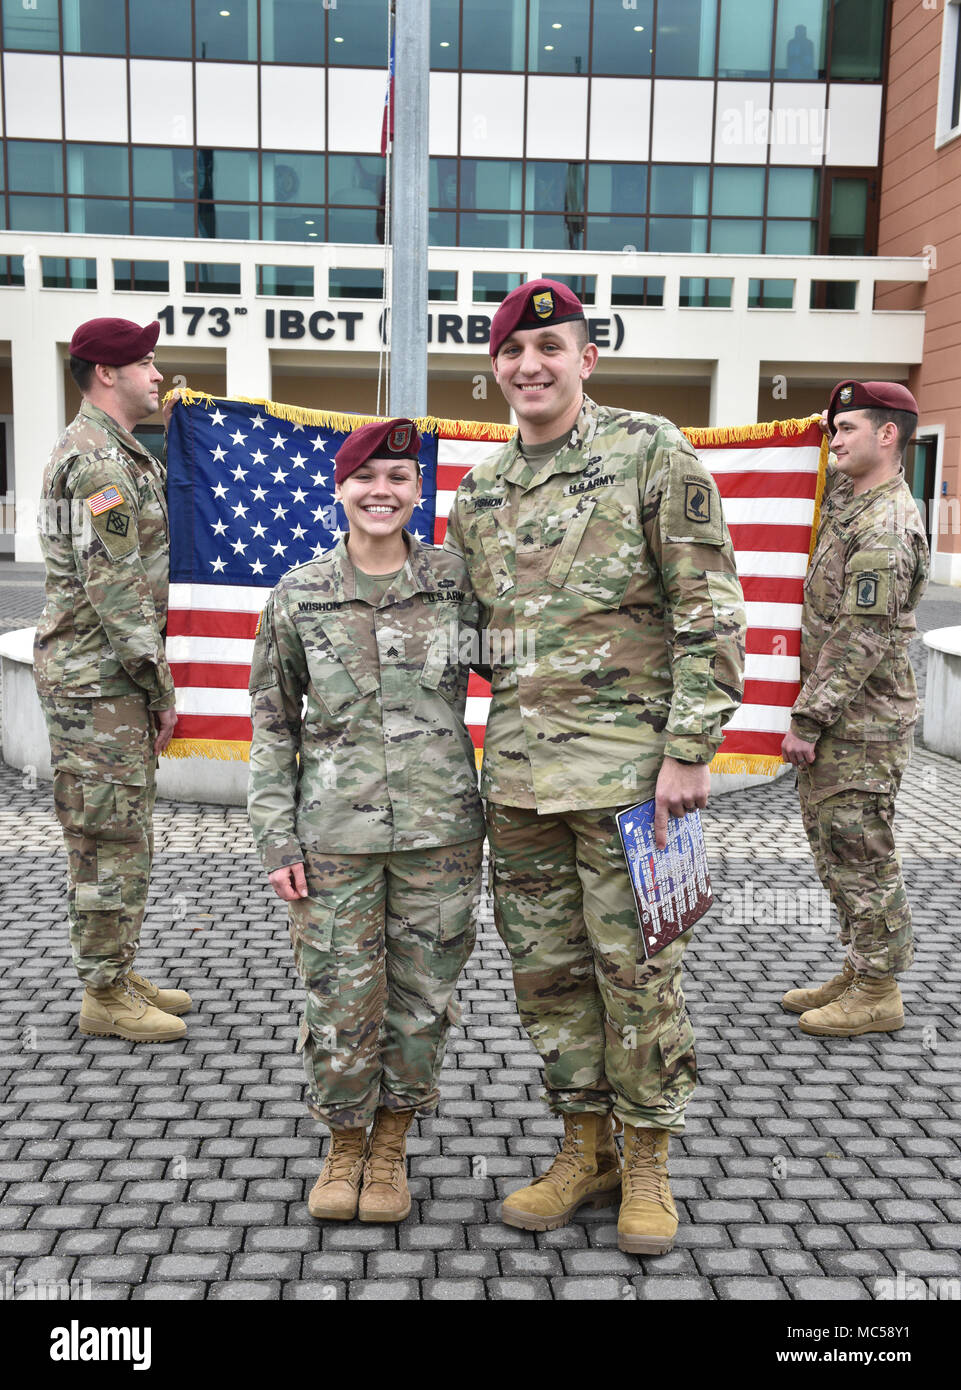 VICENZA, Italy- Sgt. Vanessa Wishon, 1st Battalion, 503rd Infantry Regiment, 173rd Airborne Brigade, and Sgt. Cody Wishon, Brigade Support Battalion, also from the 173rd Airborne Brigade, both reenlist to stay in the Army. Vanessa Wishon reenlisted for 6 years, and Cody Wishon reenlisted for 3. Stock Photo